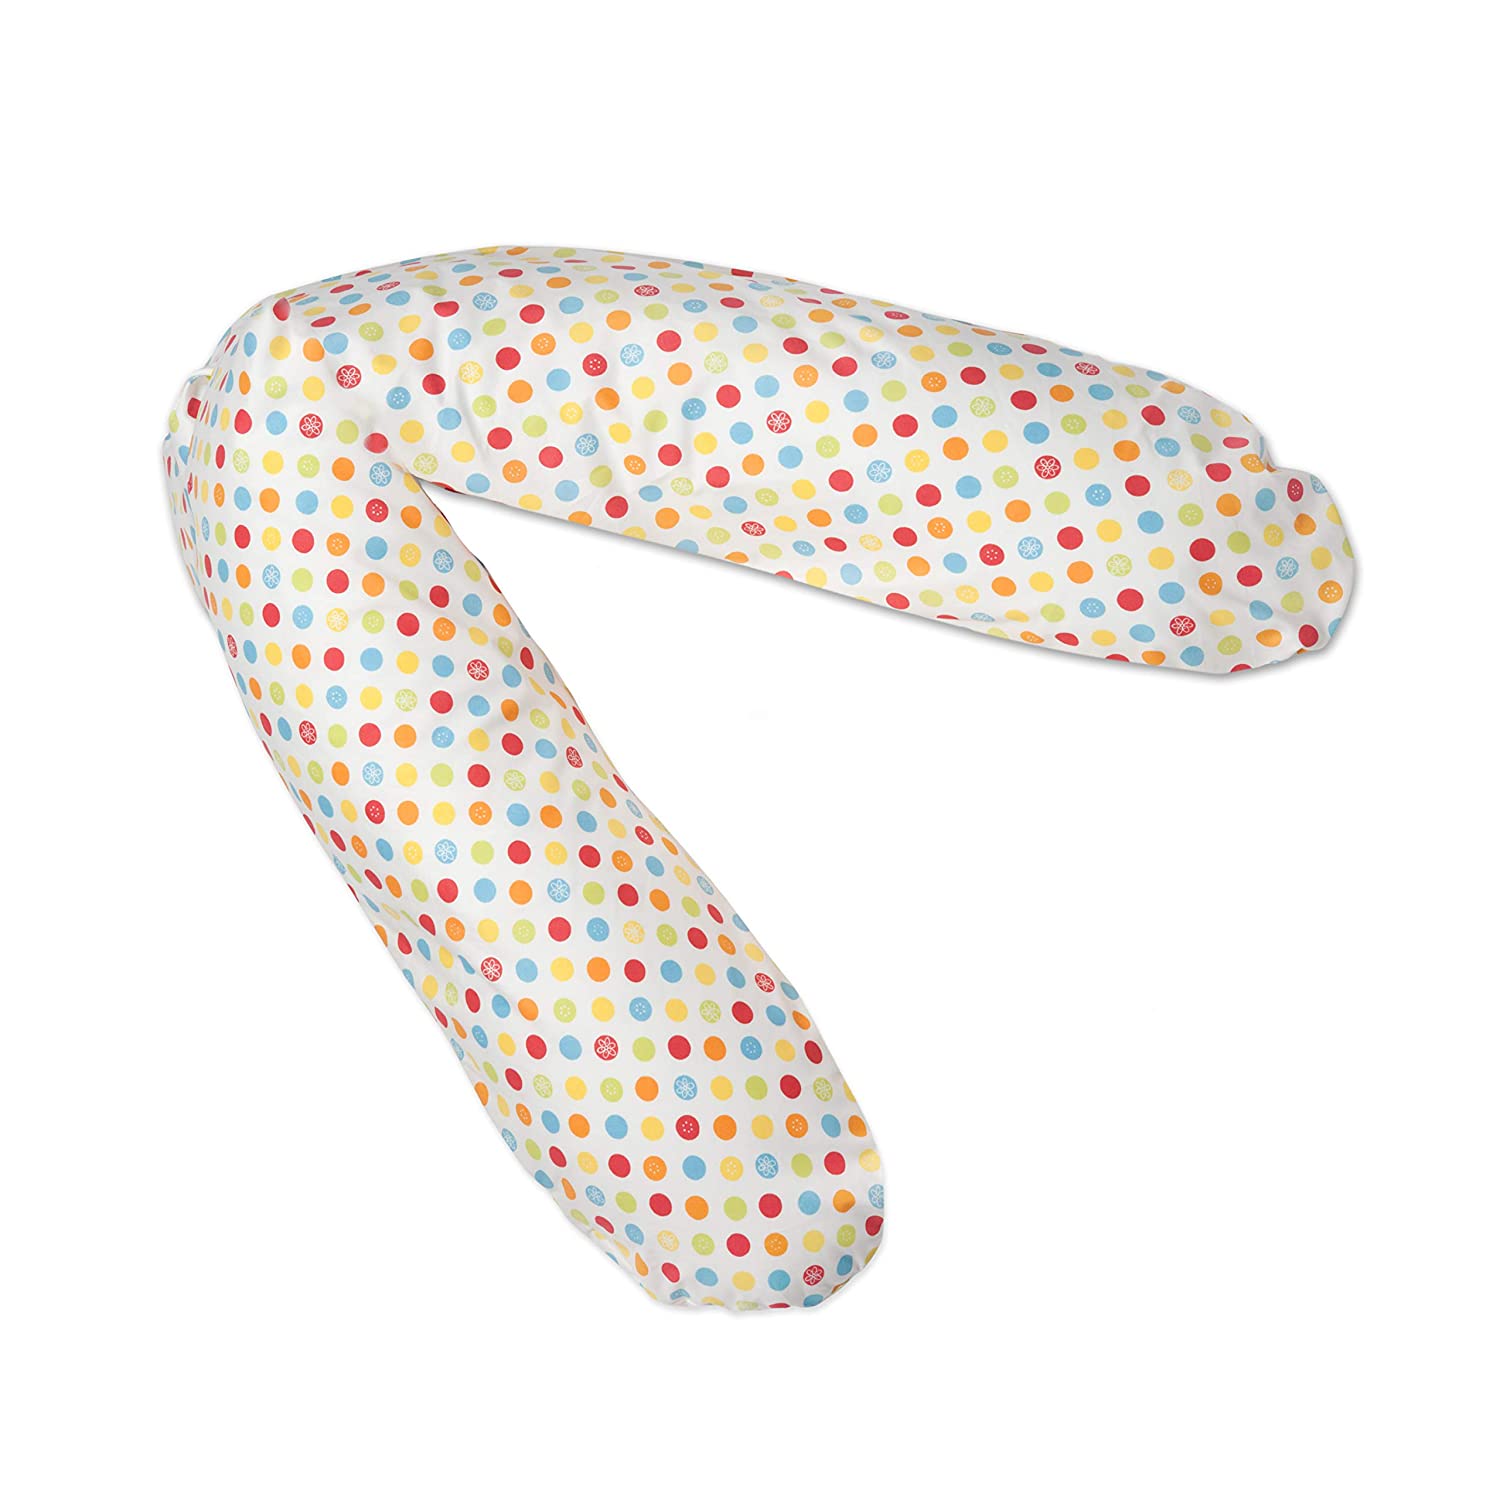 Honey Collection Breastfeeding Pillow, Soft and Cuddly EPS, Microbead Filling, Support Pillow, TÜV Certified, 100% Cotton Pregnancy Pillow 170 cm Colourful dots